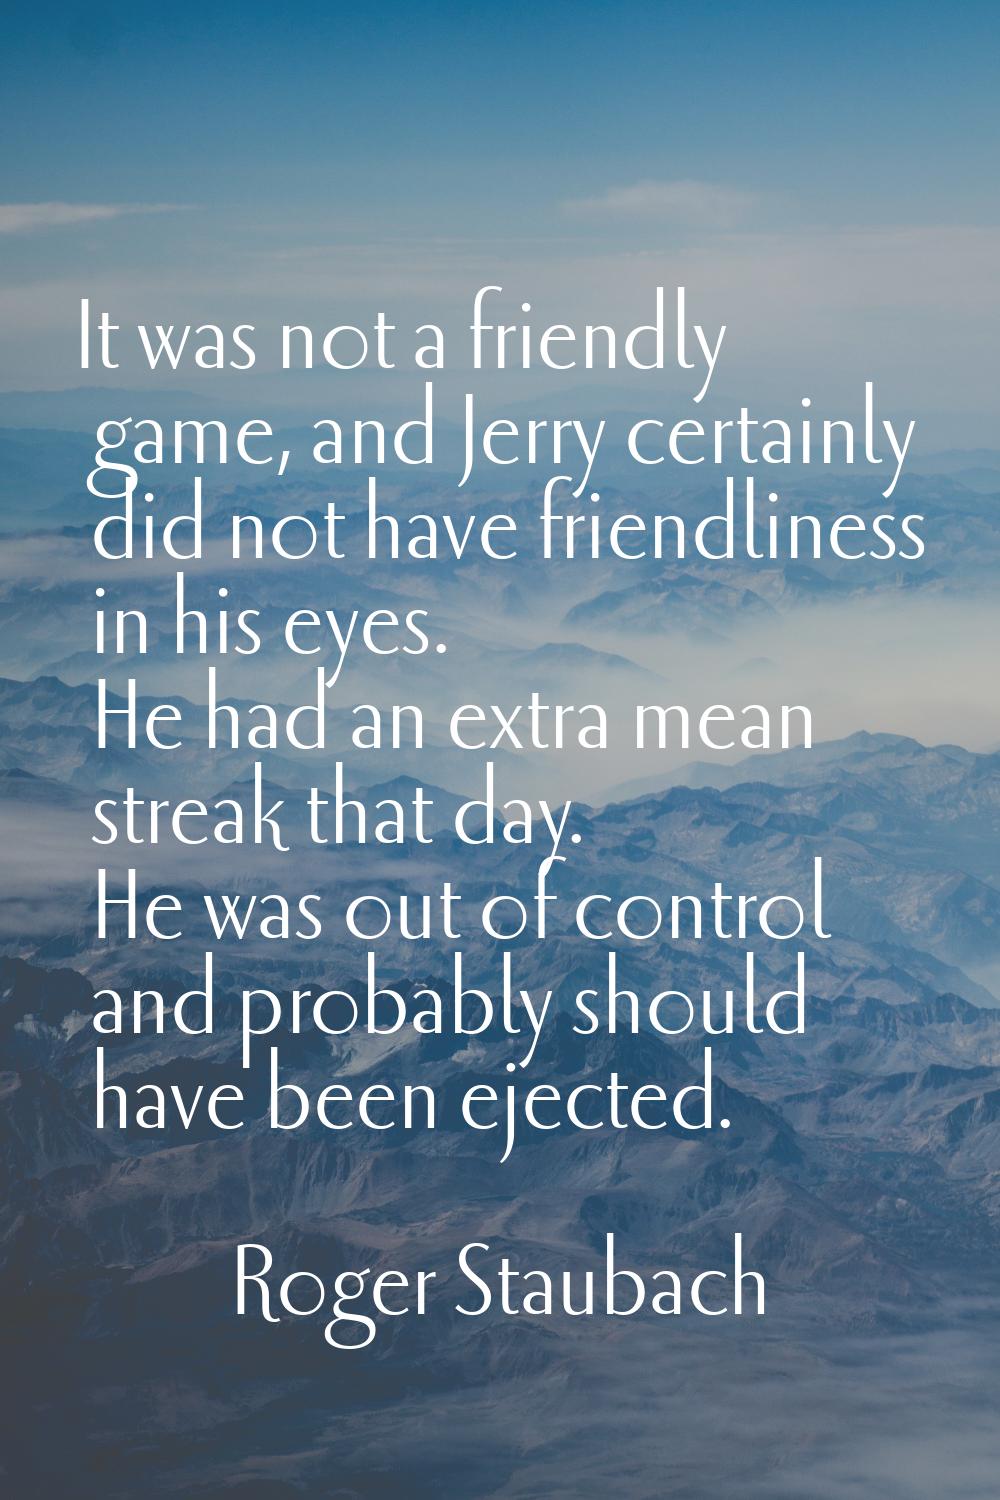 It was not a friendly game, and Jerry certainly did not have friendliness in his eyes. He had an ex